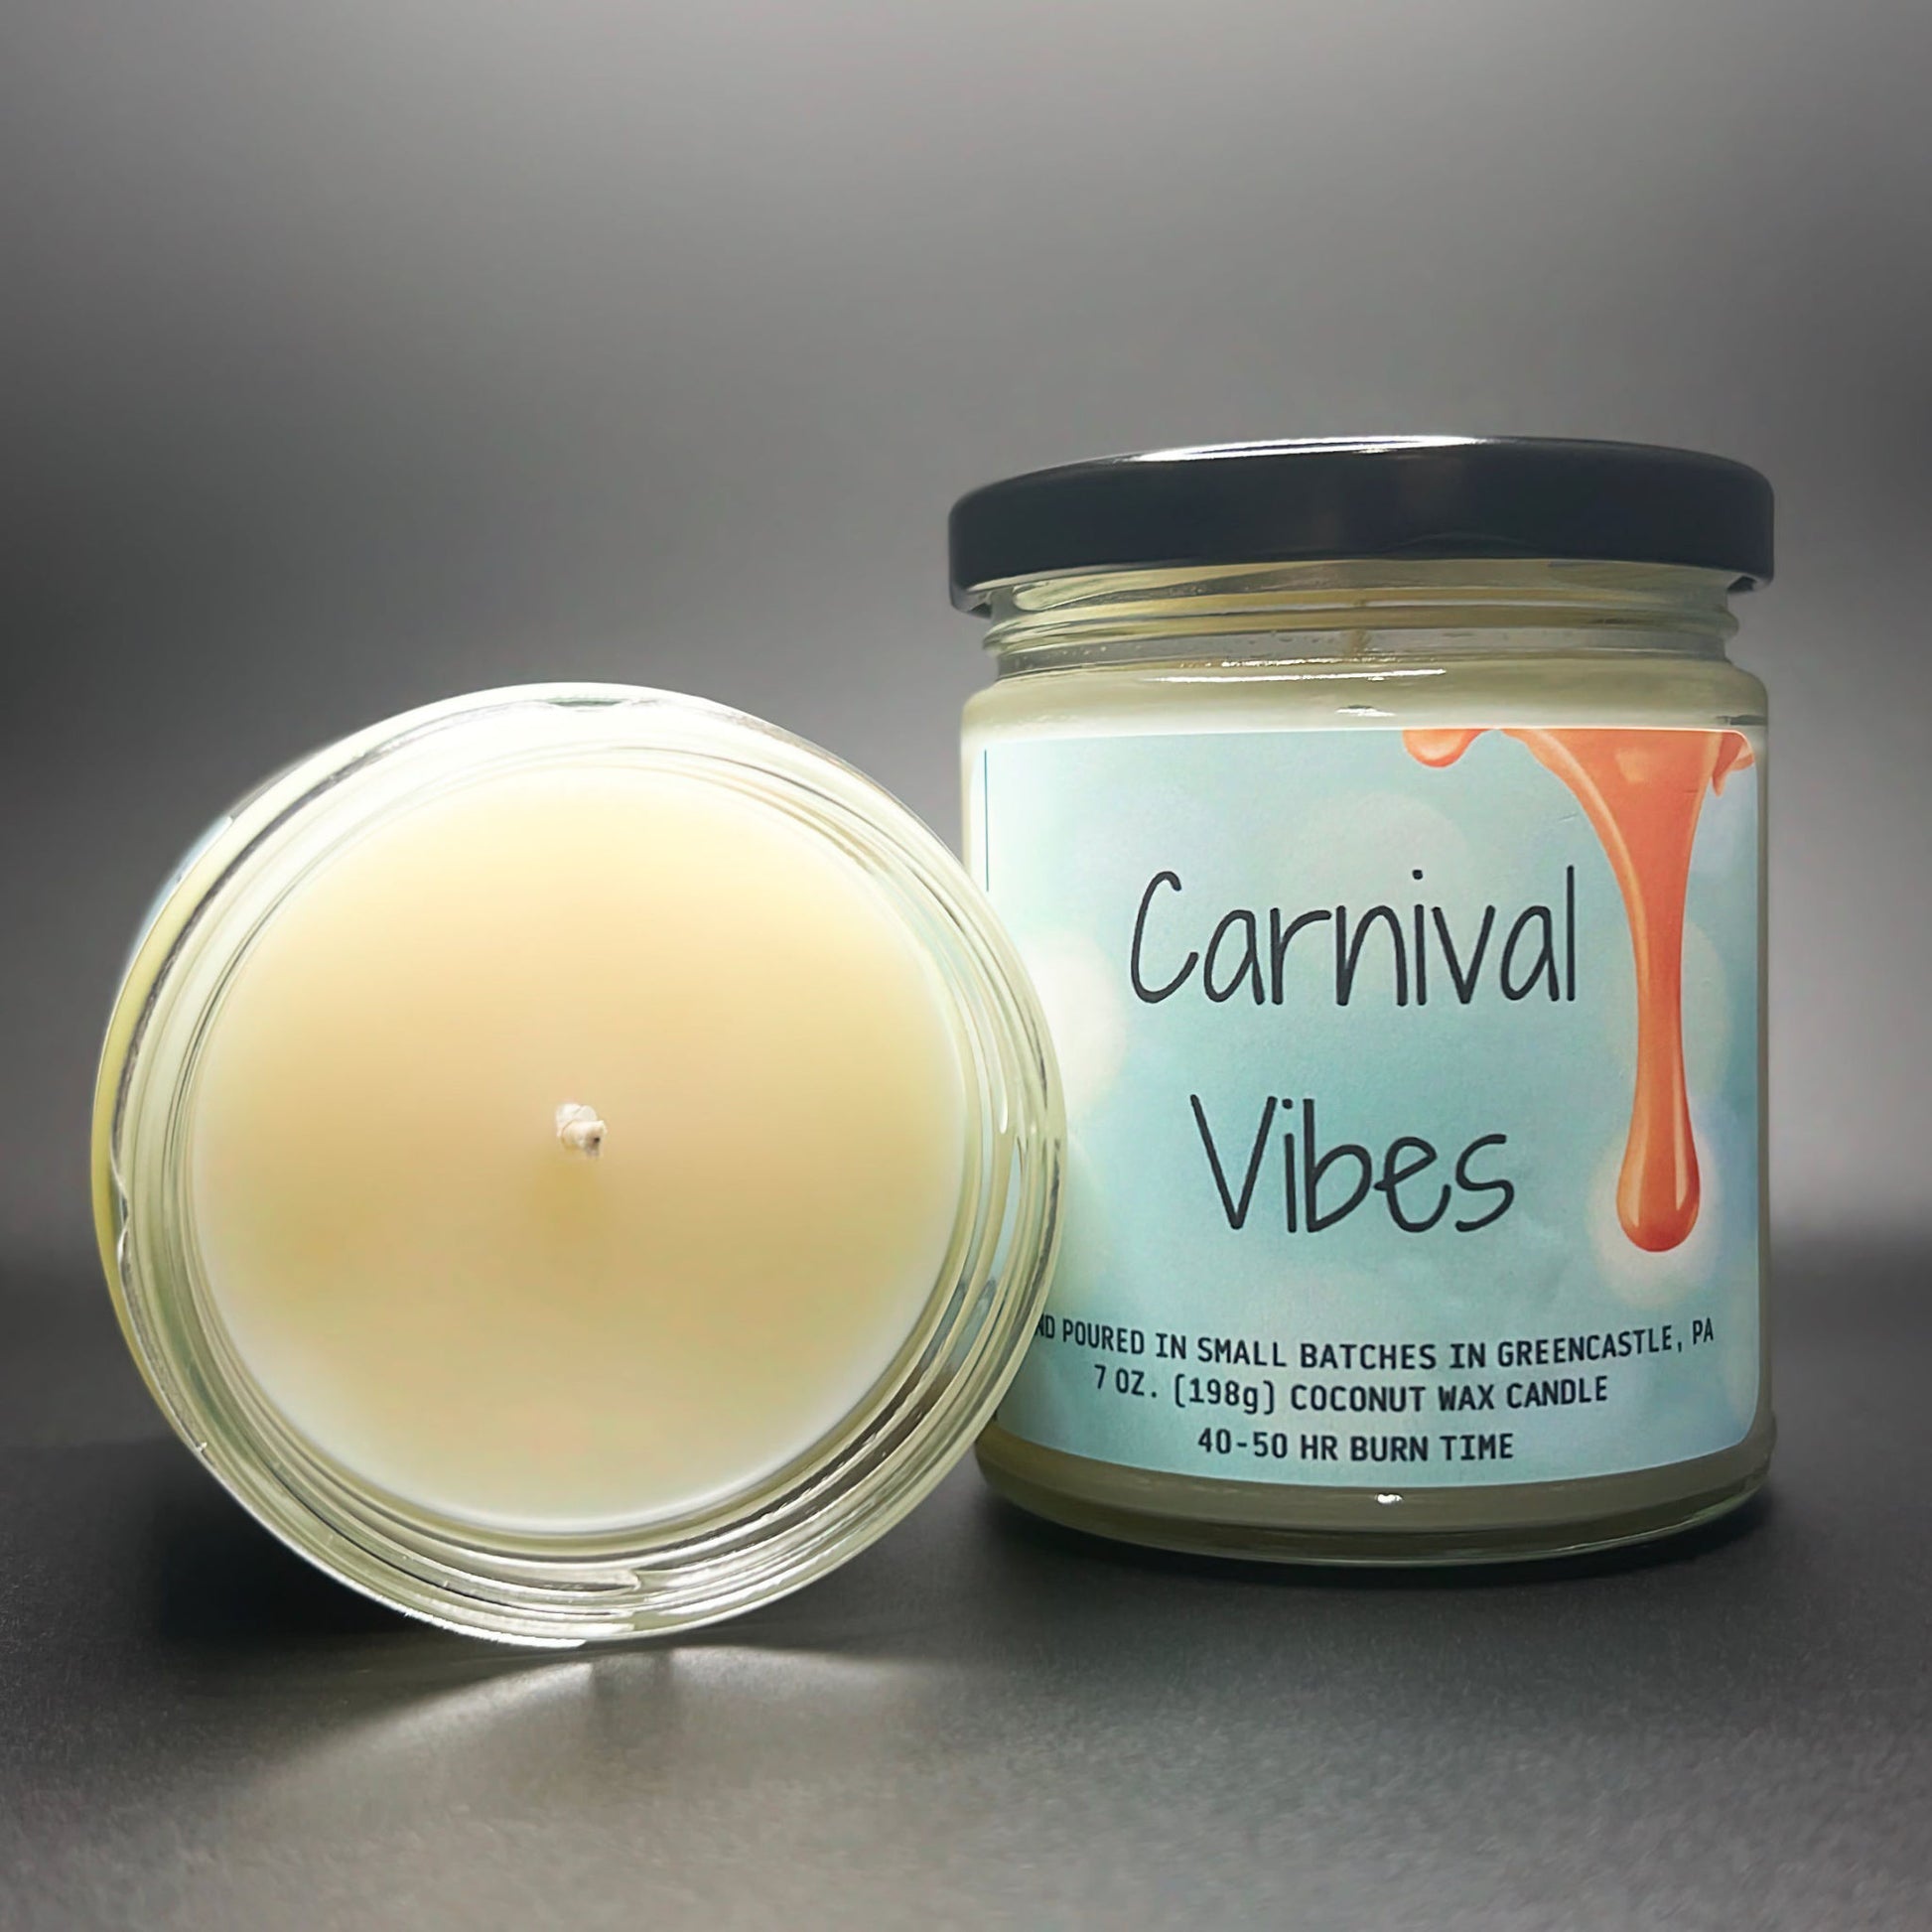 Top view of lit Carnival Vibes scented coconut soy wax candle.